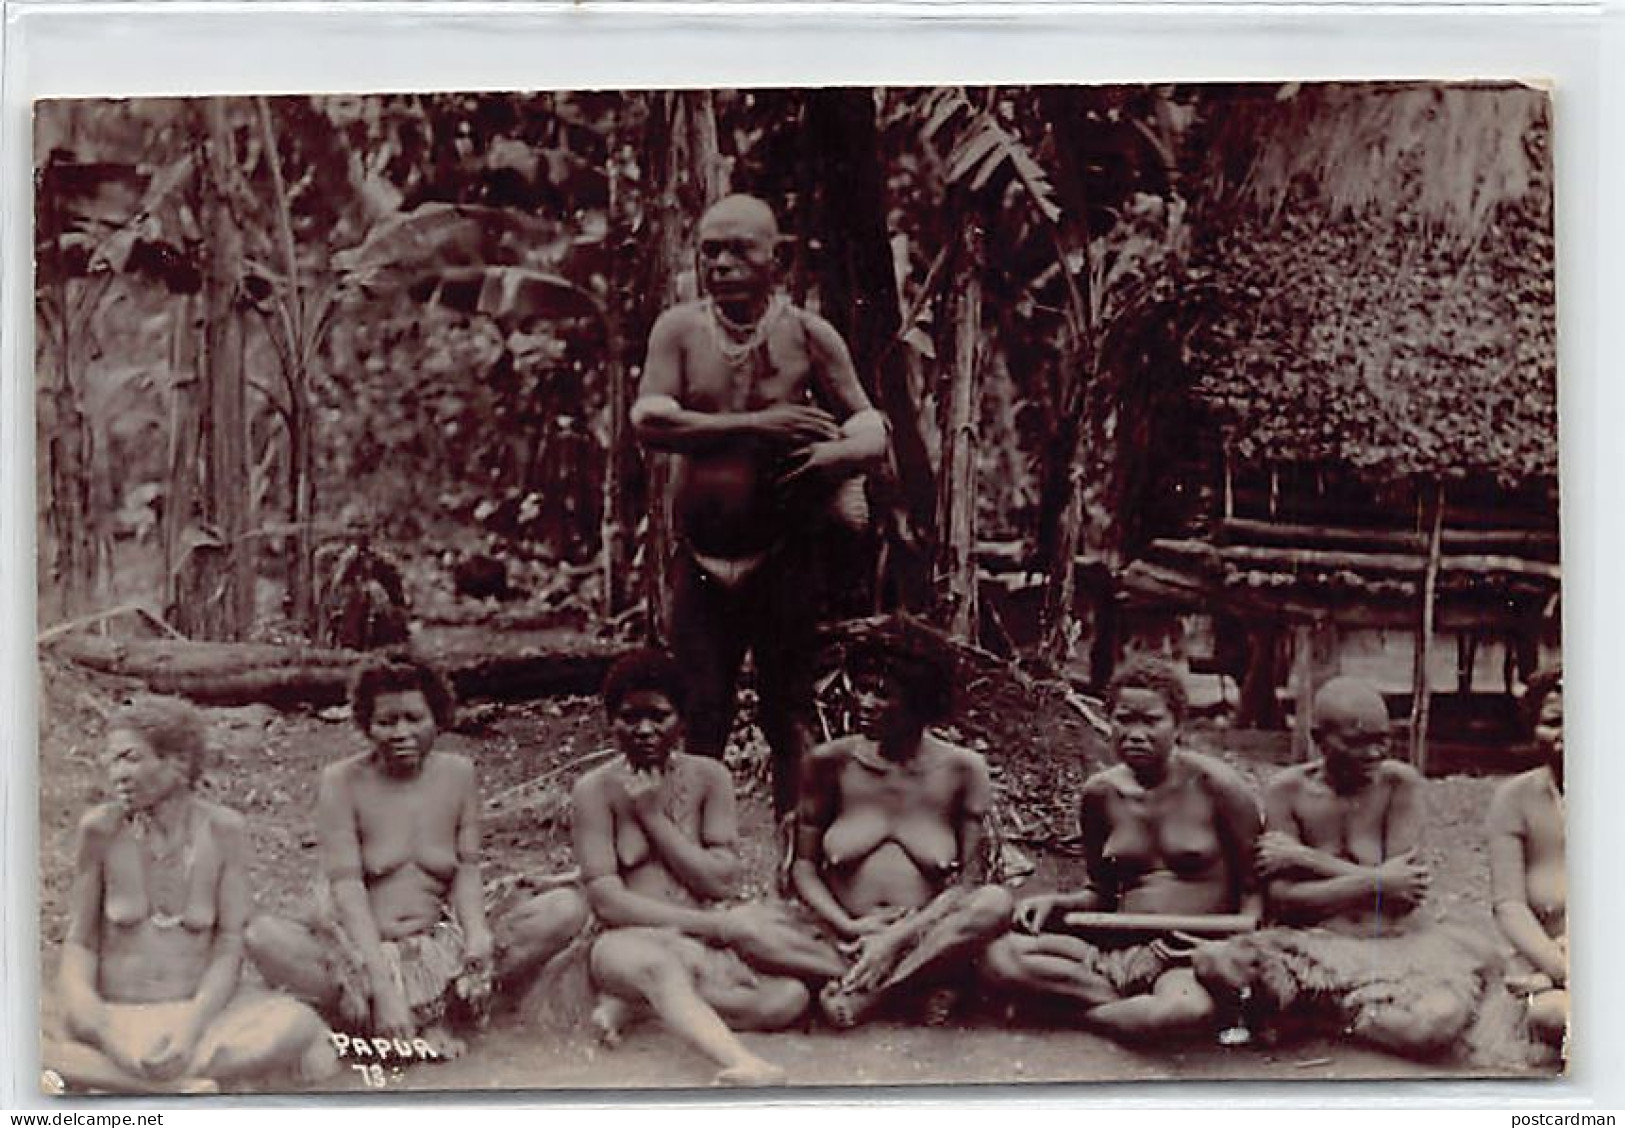 PAPUA NEW GUINEA - Papuan Chief And His Nude Wives - REAL PHOTO - Publ. W. H. Cooper. - Papua New Guinea